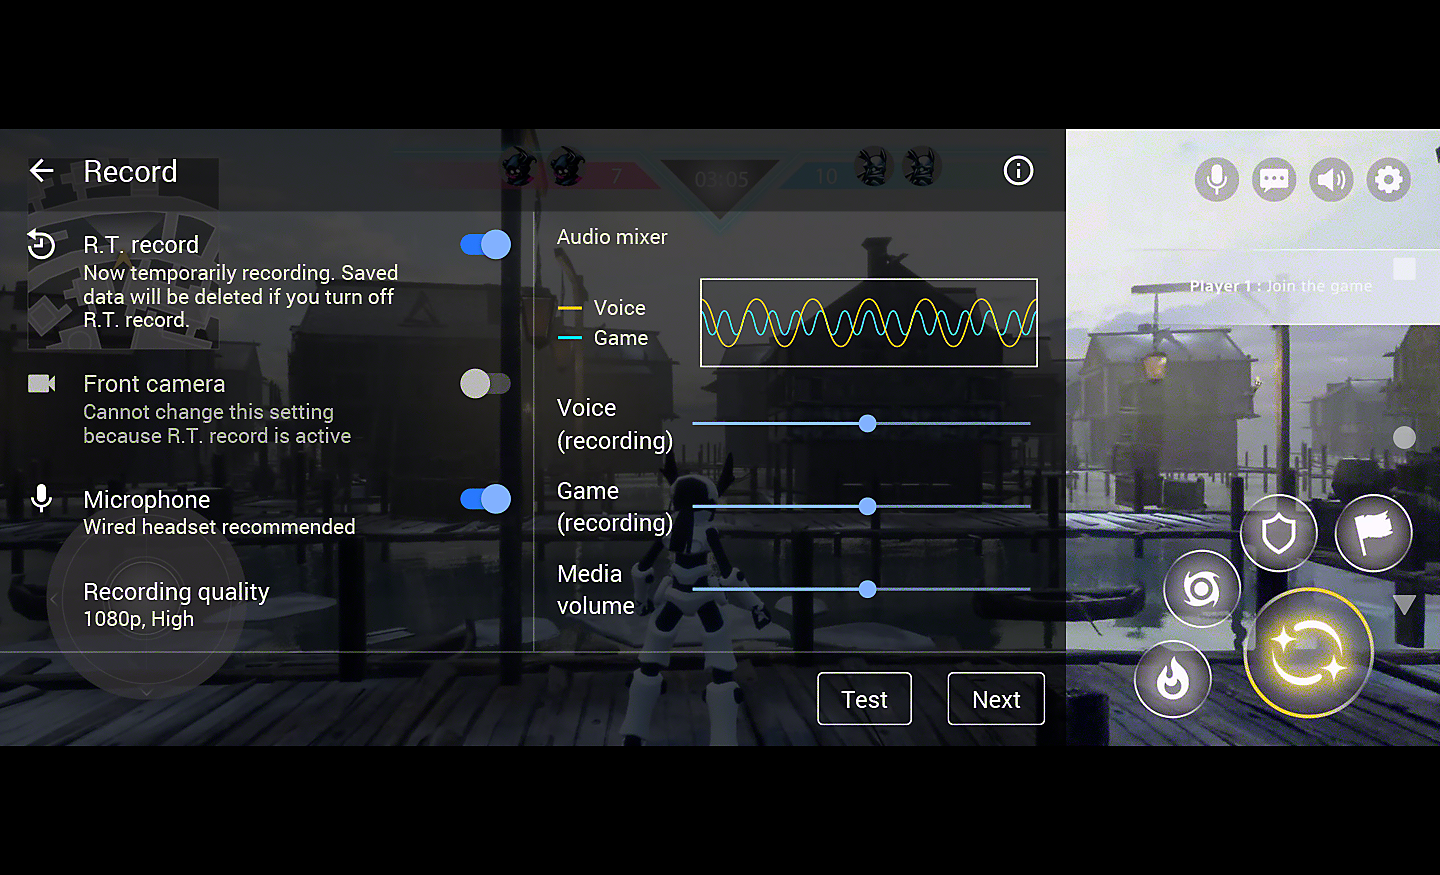 Screenshot showing UI for adjustable settings including R.T. record